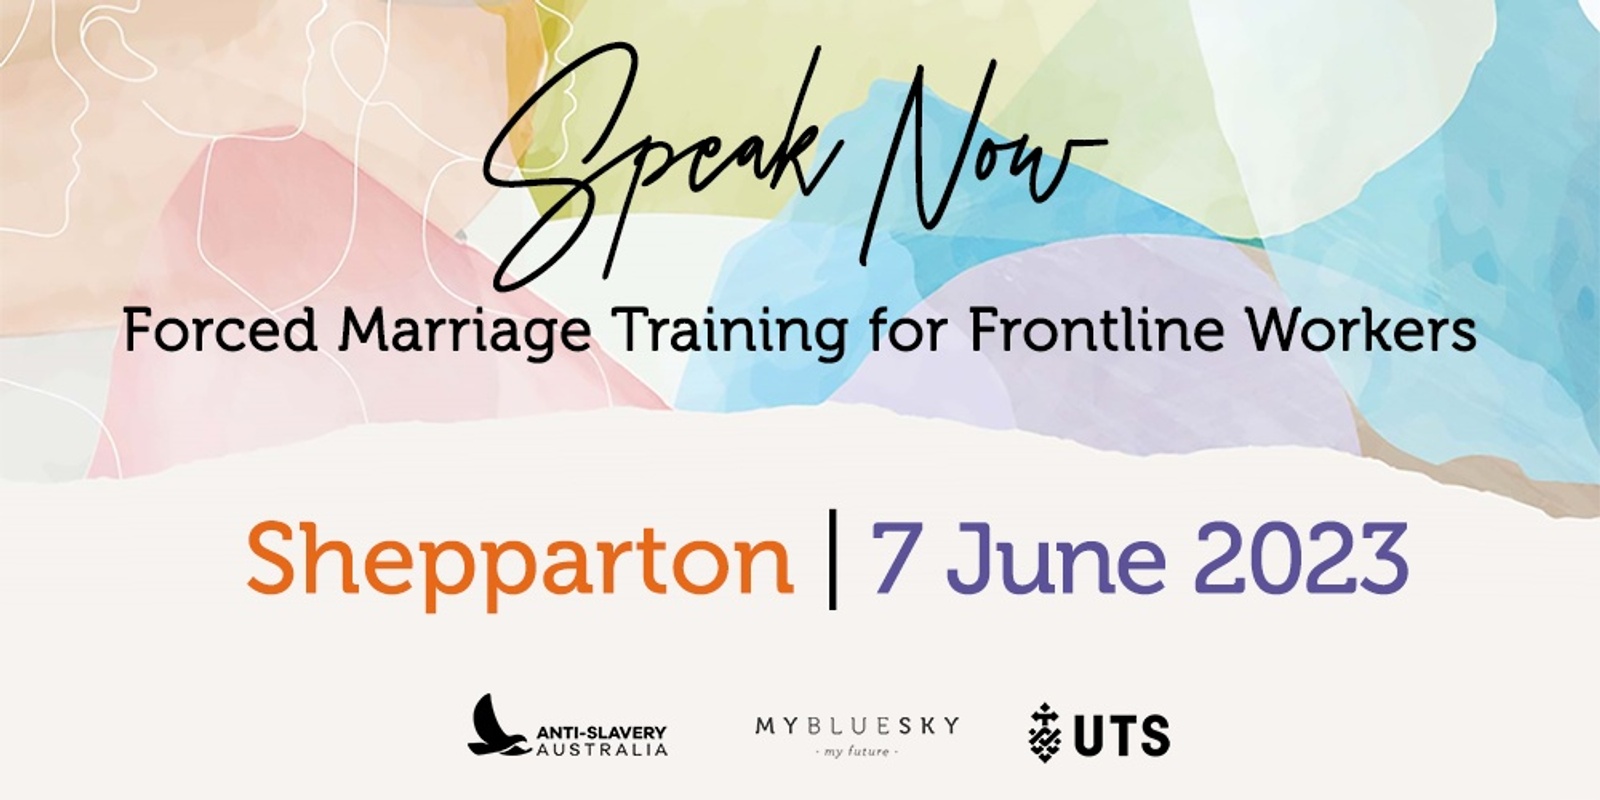 Banner image for Speak Now: Forced Marriage Training for Frontline Workers | SHEPPARTON | 7 June 2023